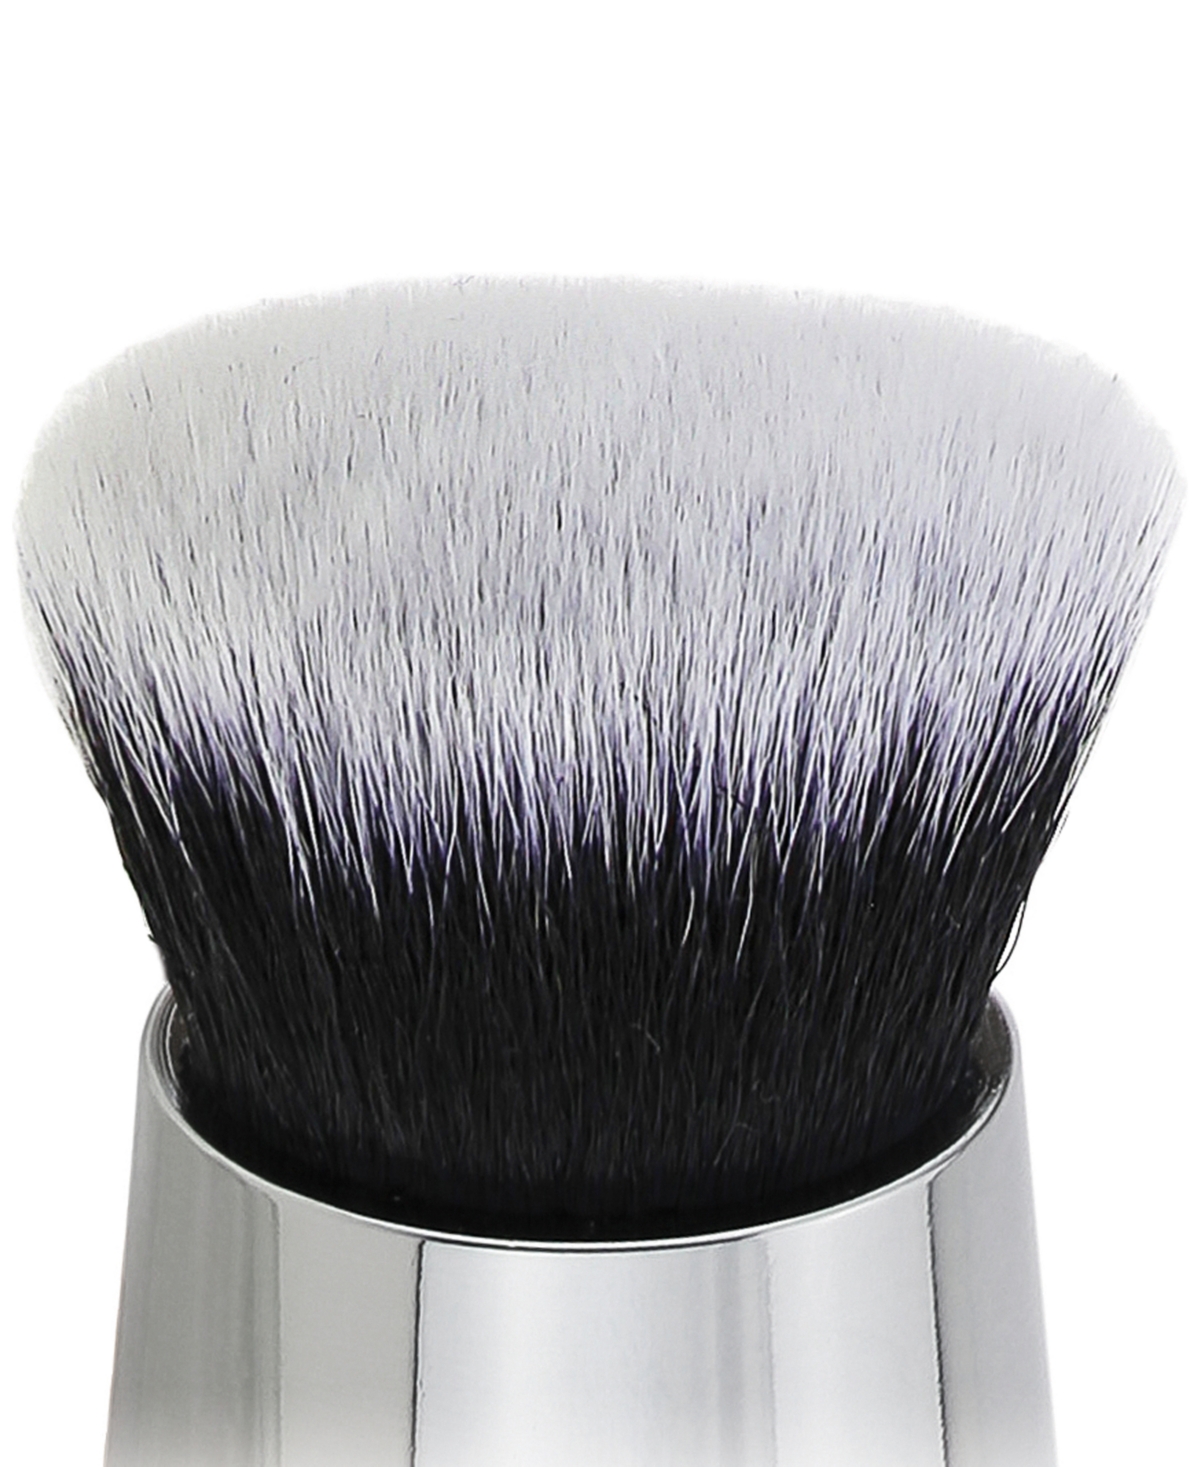 Michael Todd Sonicblend Beauty Flat Top Replacement Universal Brush Head No. 8 - Grey